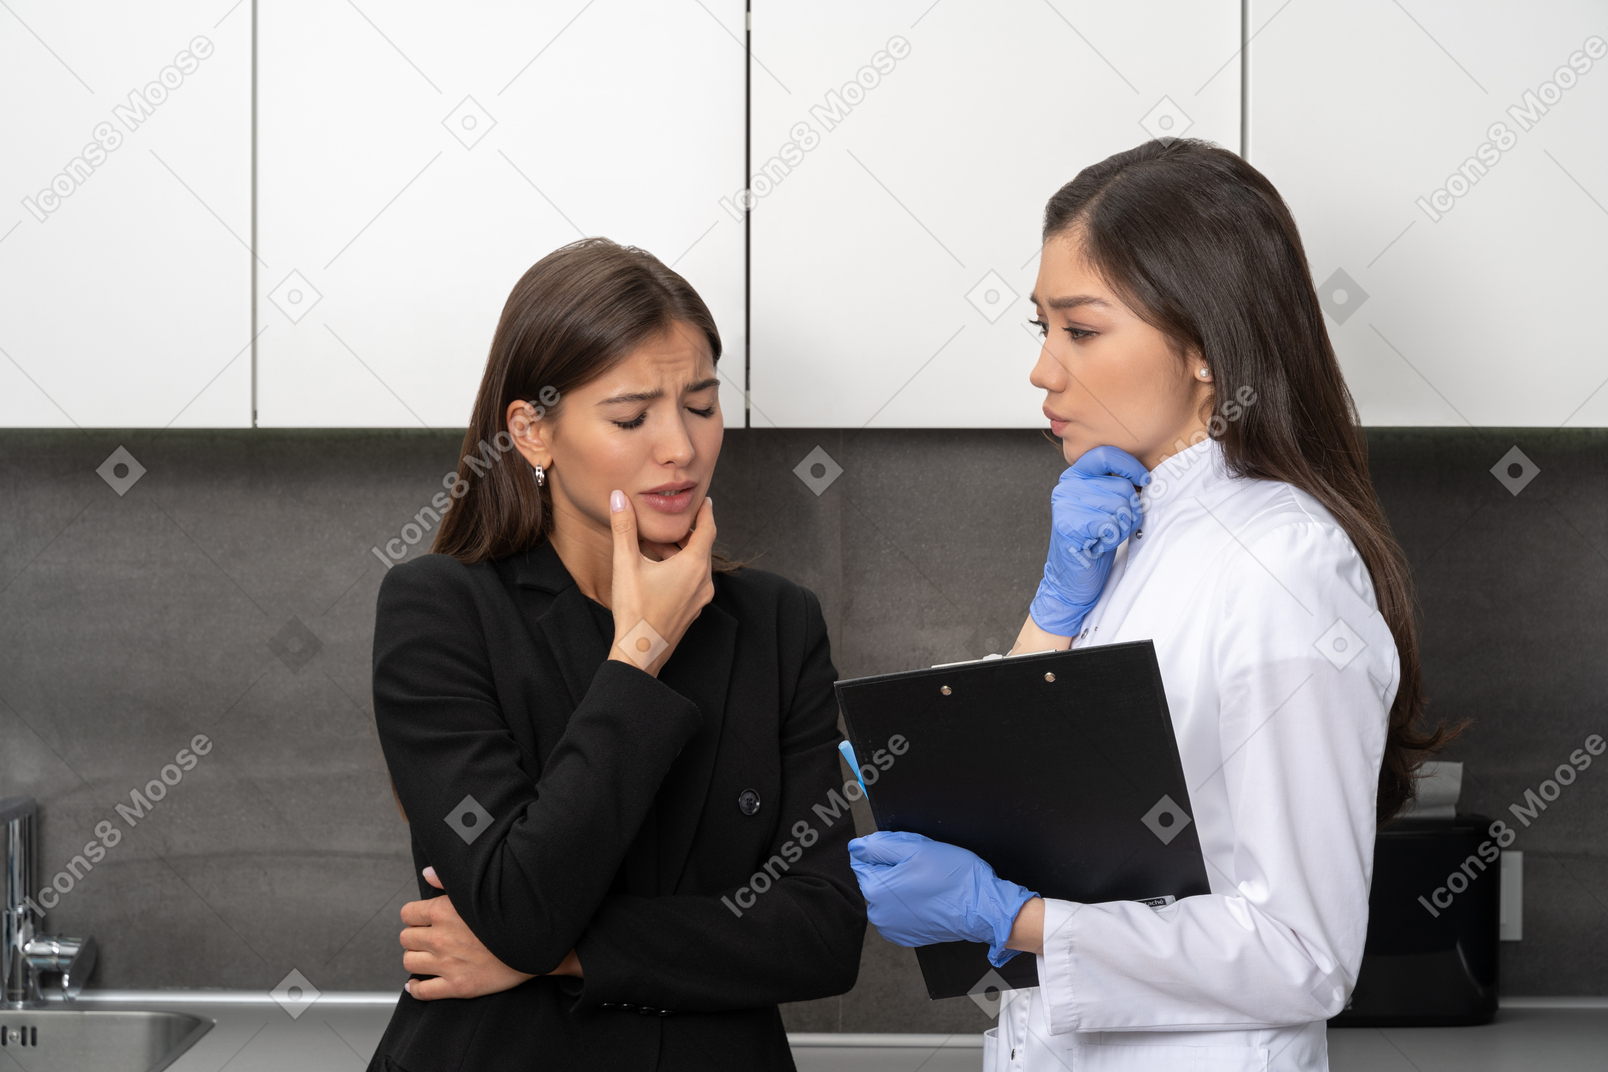 Patient and doctor discussing